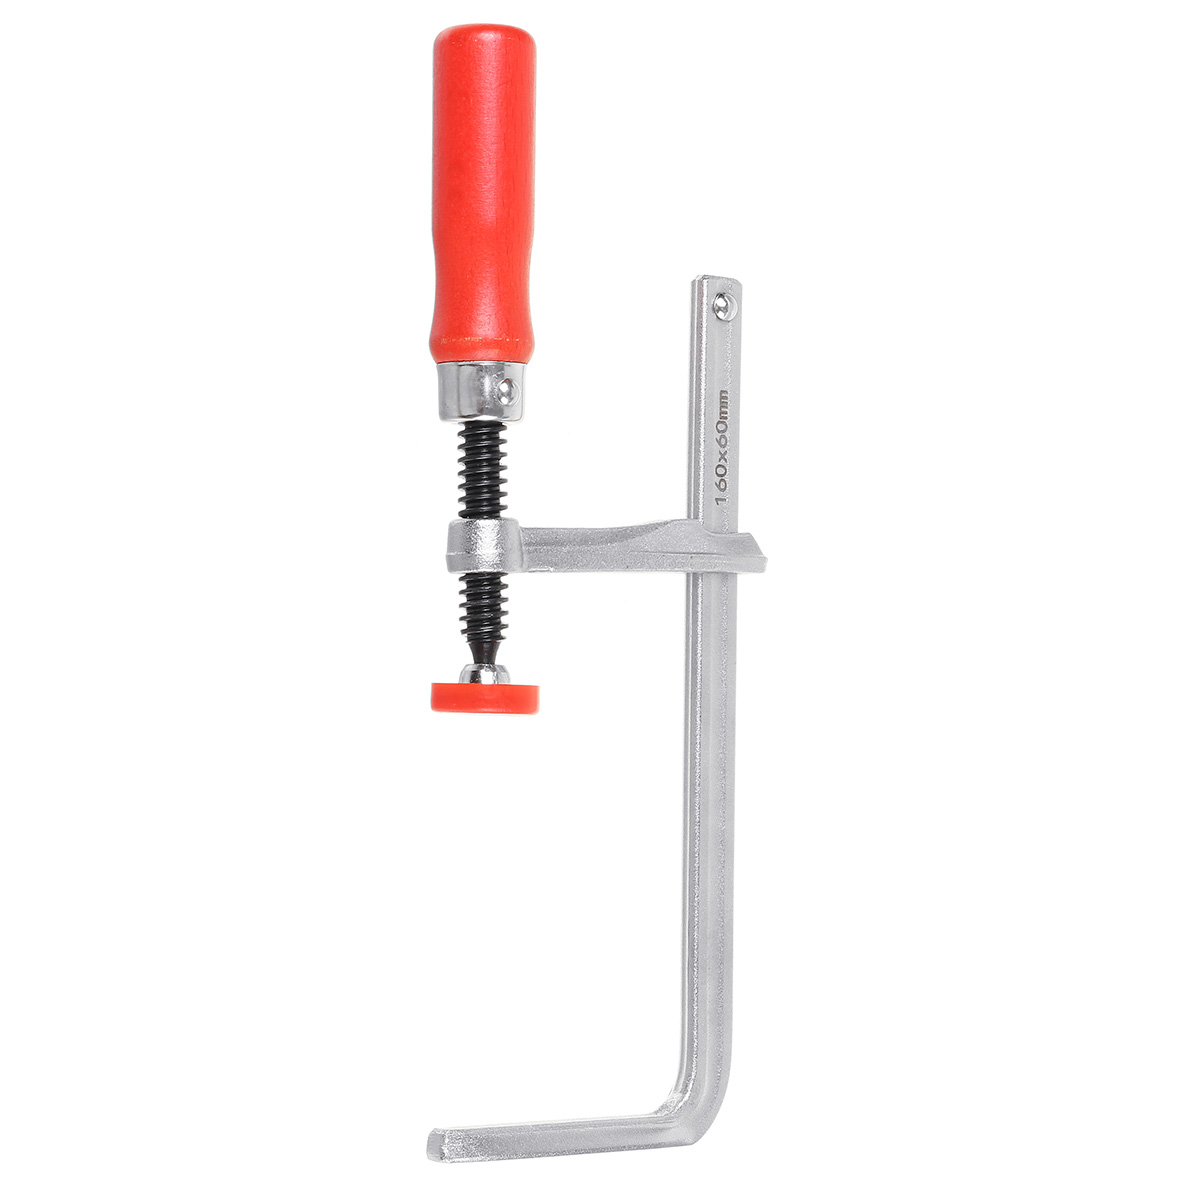 Drillpro-Quick-Screw-Guide-Rail-Clamp-for-MFT-Table-and-Guide-Rail-System-Woodworking-F-Clamp-DIY-To-1835112-2